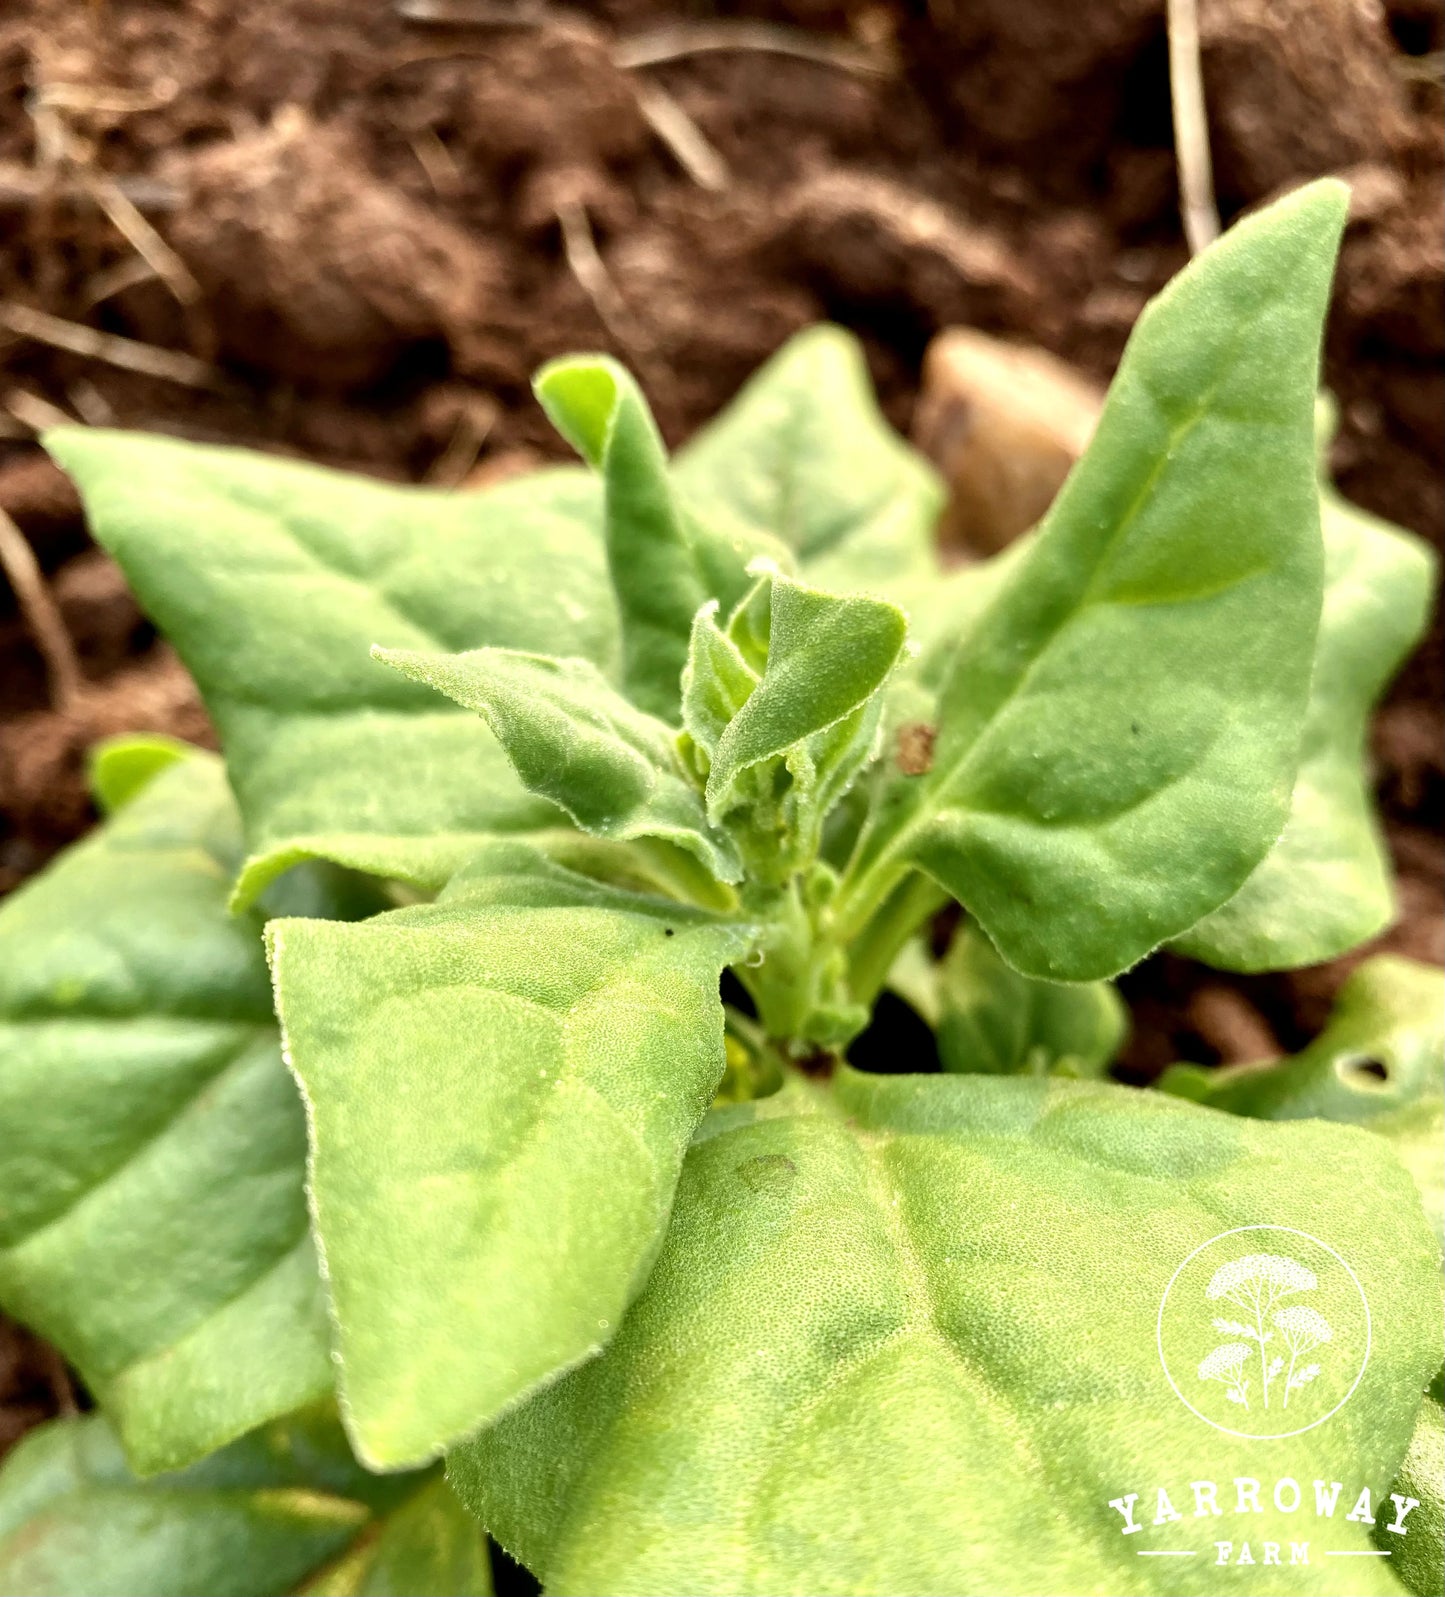 New Zealand Spinach